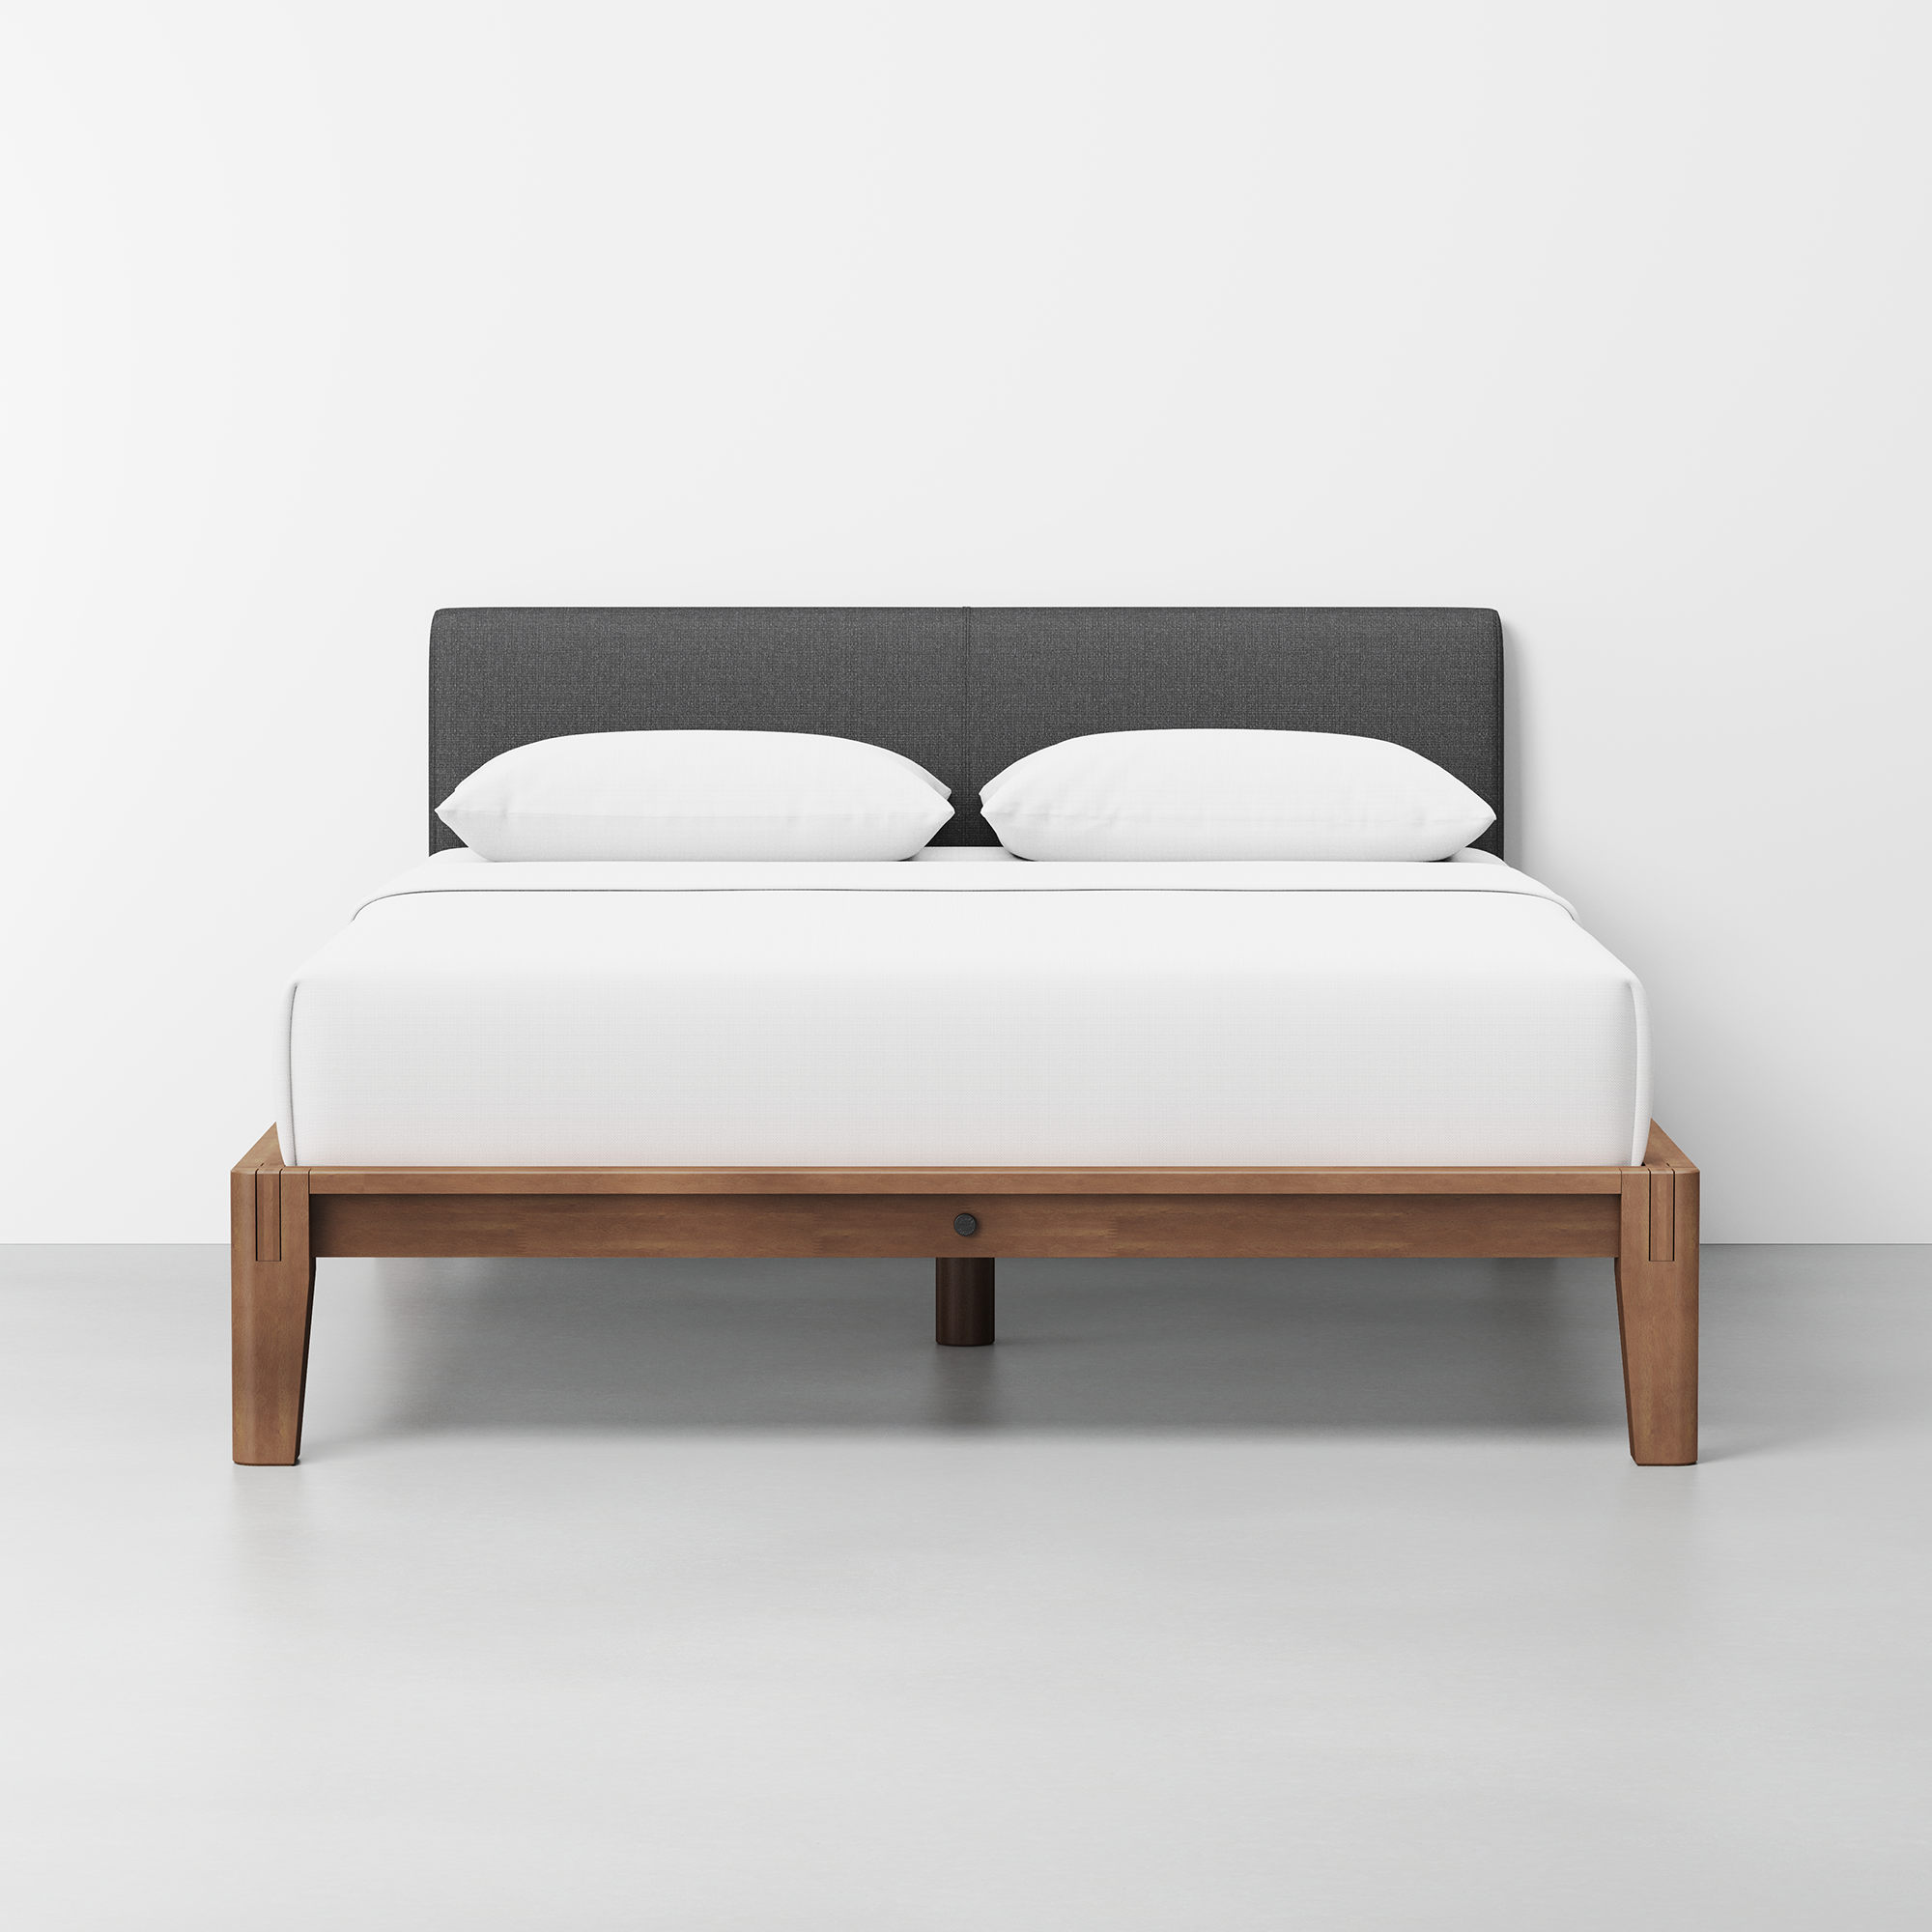 The Bed (Walnut / Dark Charcoal) - Render - Front